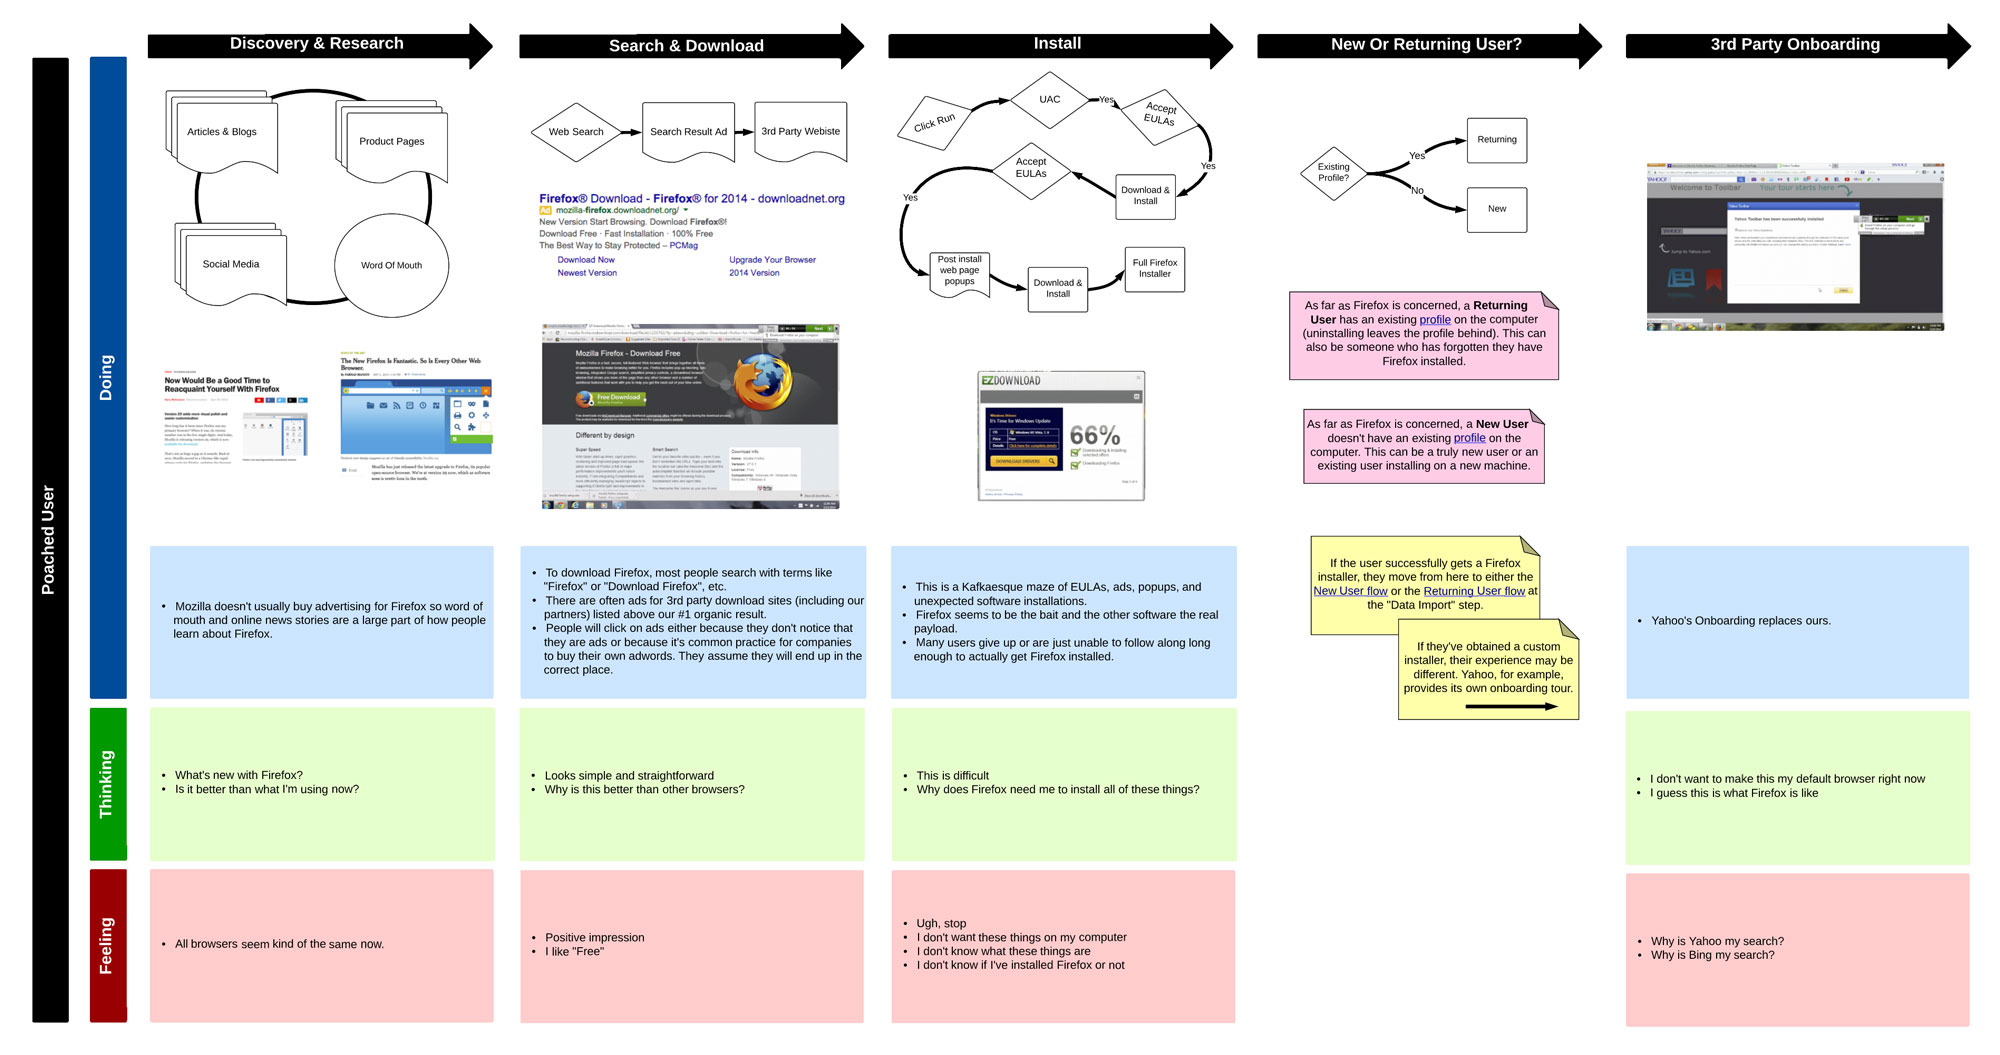 A user journey map oulining the install flow for people who try to download Firefox from fake download sites.